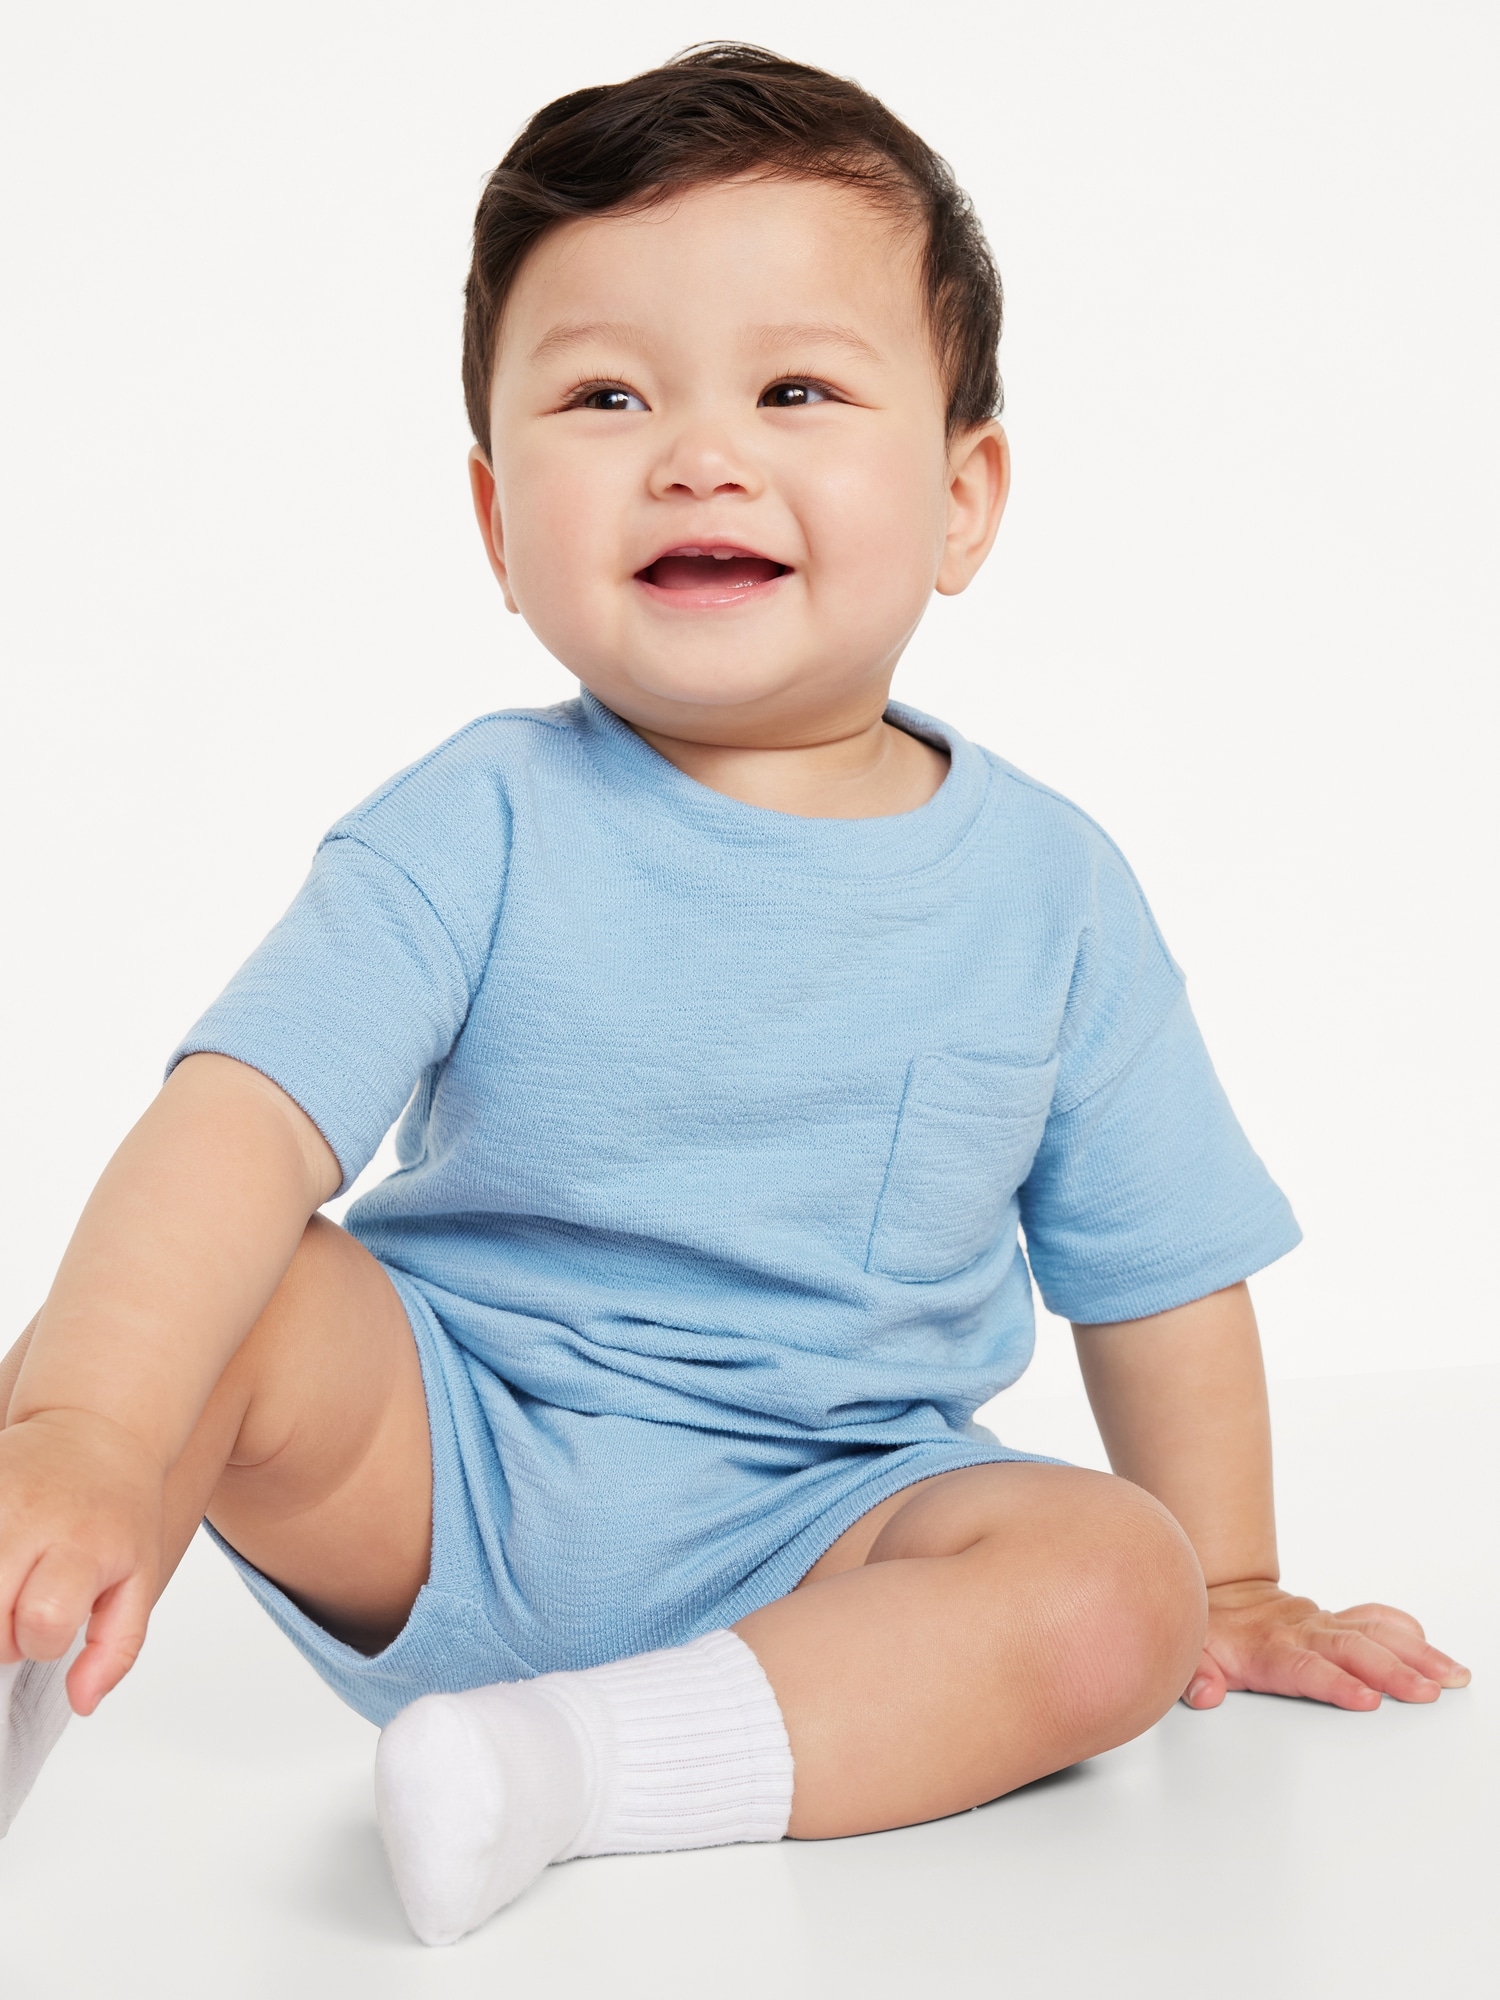 Short-Sleeve Pocket T-Shirt and Shorts Set for Baby | Old Navy